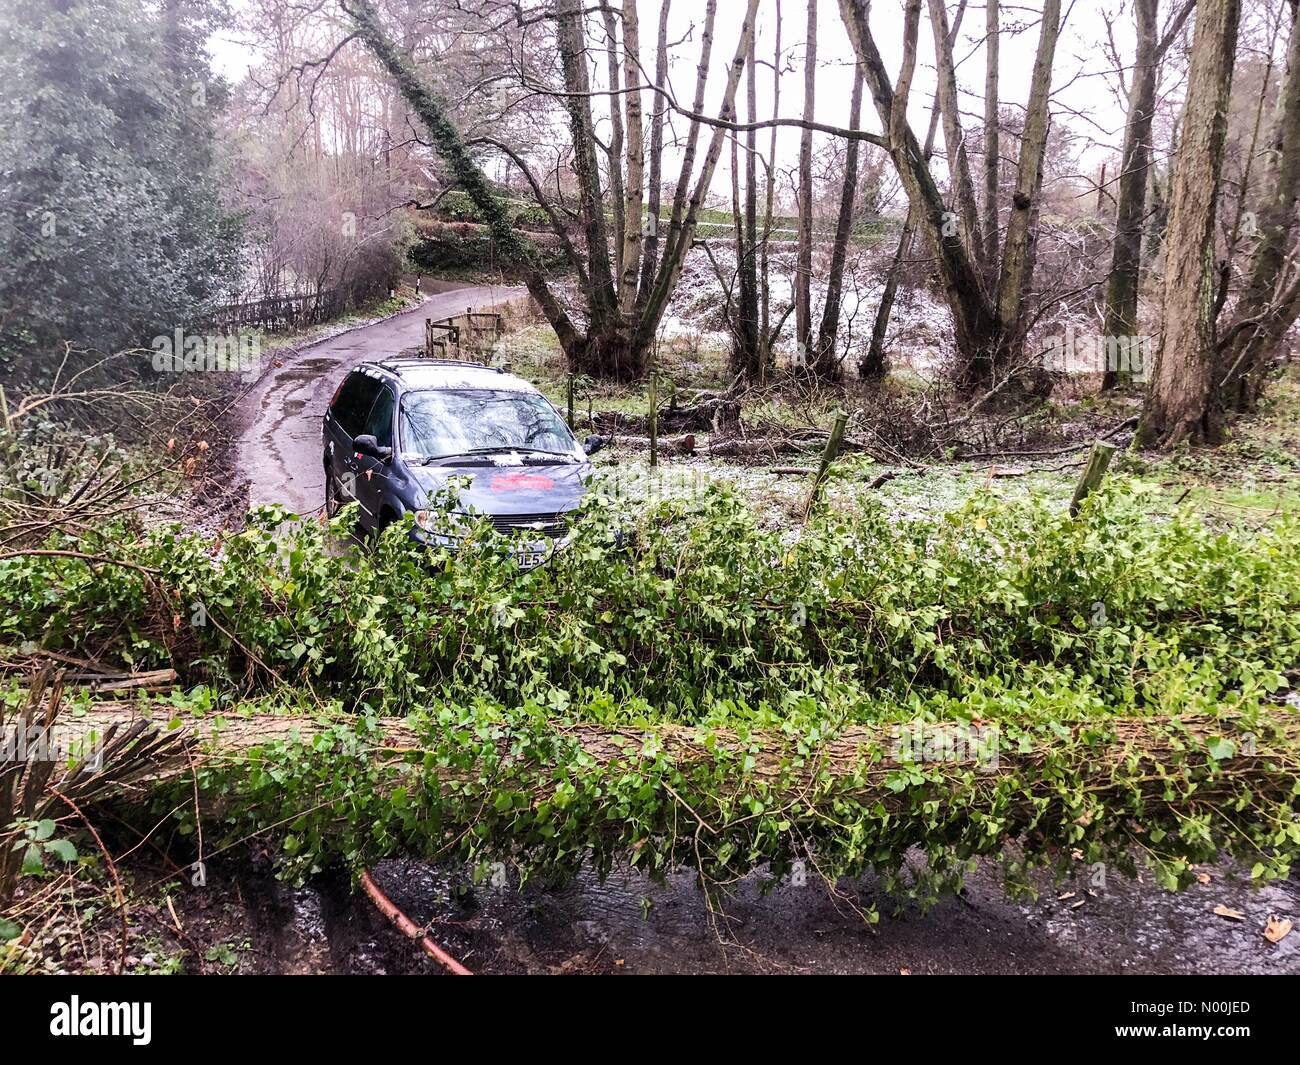 Guildford, UK. 27th Dec, 2017. UK Weather: Snowfall in Godalming. Thorncombe St, Godalming. 27th December 2017. Gale force northerly winds brought dangerous driving conditions today. A blocked road due to a fallen tree in Godalming Credit: jamesjagger/StockimoNews/Alamy Live News Stock Photo